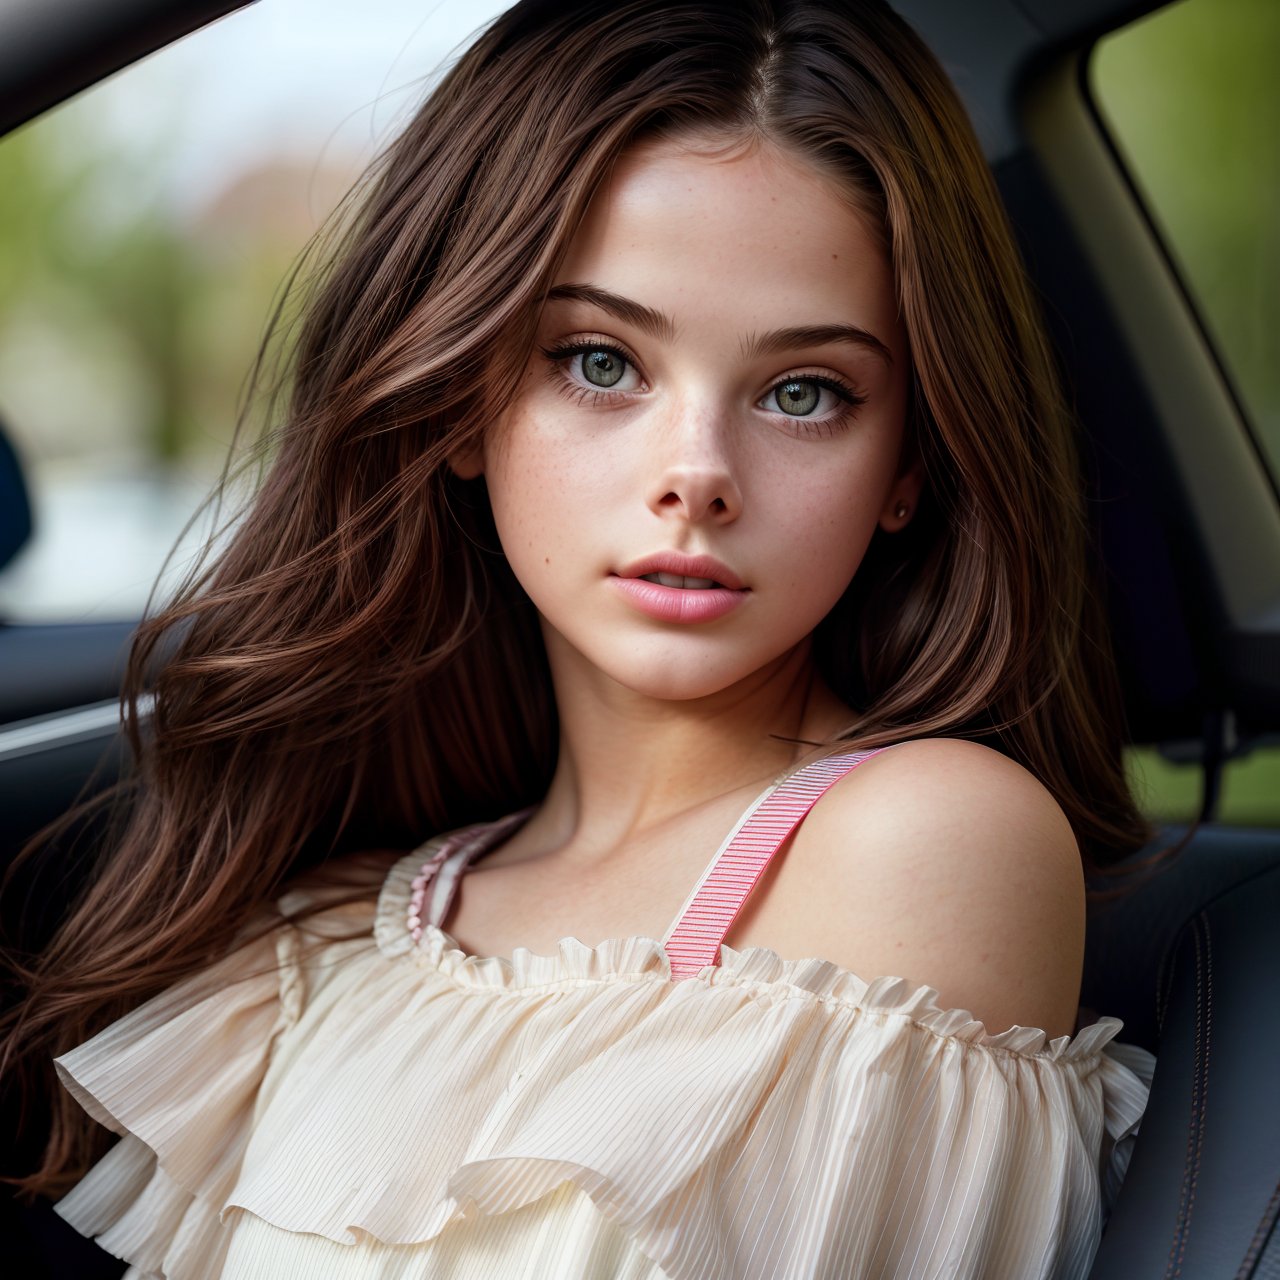 wallpaper, looking back, portrait of cute (AIDA_LoRA_MeW2016:1.11) <lora:AIDA_LoRA_MeW2016:0.89> in a dress posing in front of the car, on the parking, little girl, pretty face, intimate, hyper realistic, studio photo, studio photo, kkw-ph1, hdr, f1.6, getty images, (colorful:1.1)